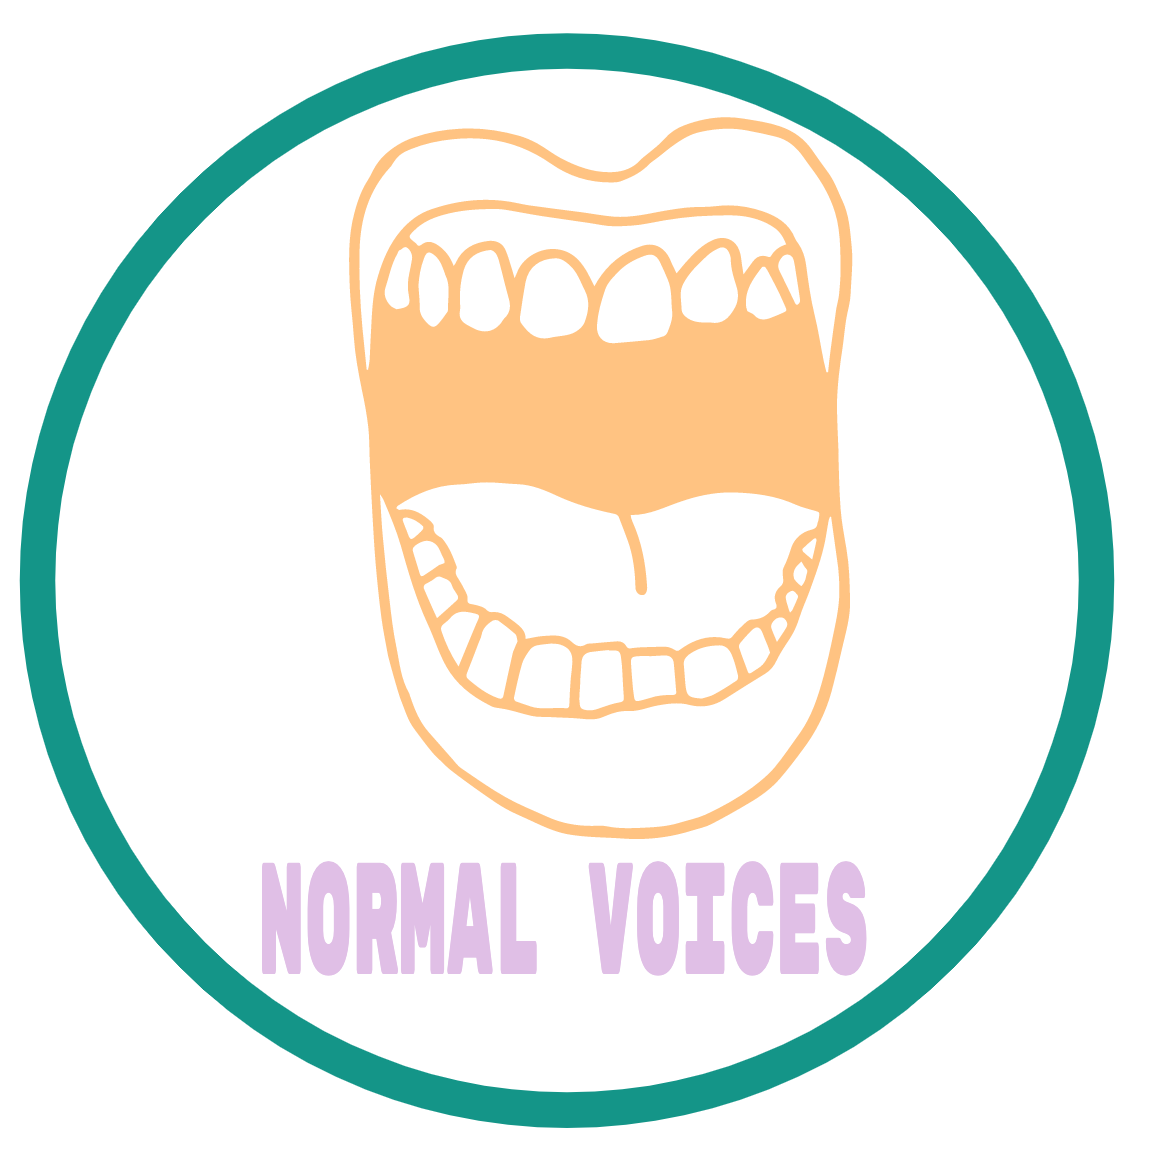 Normal voices